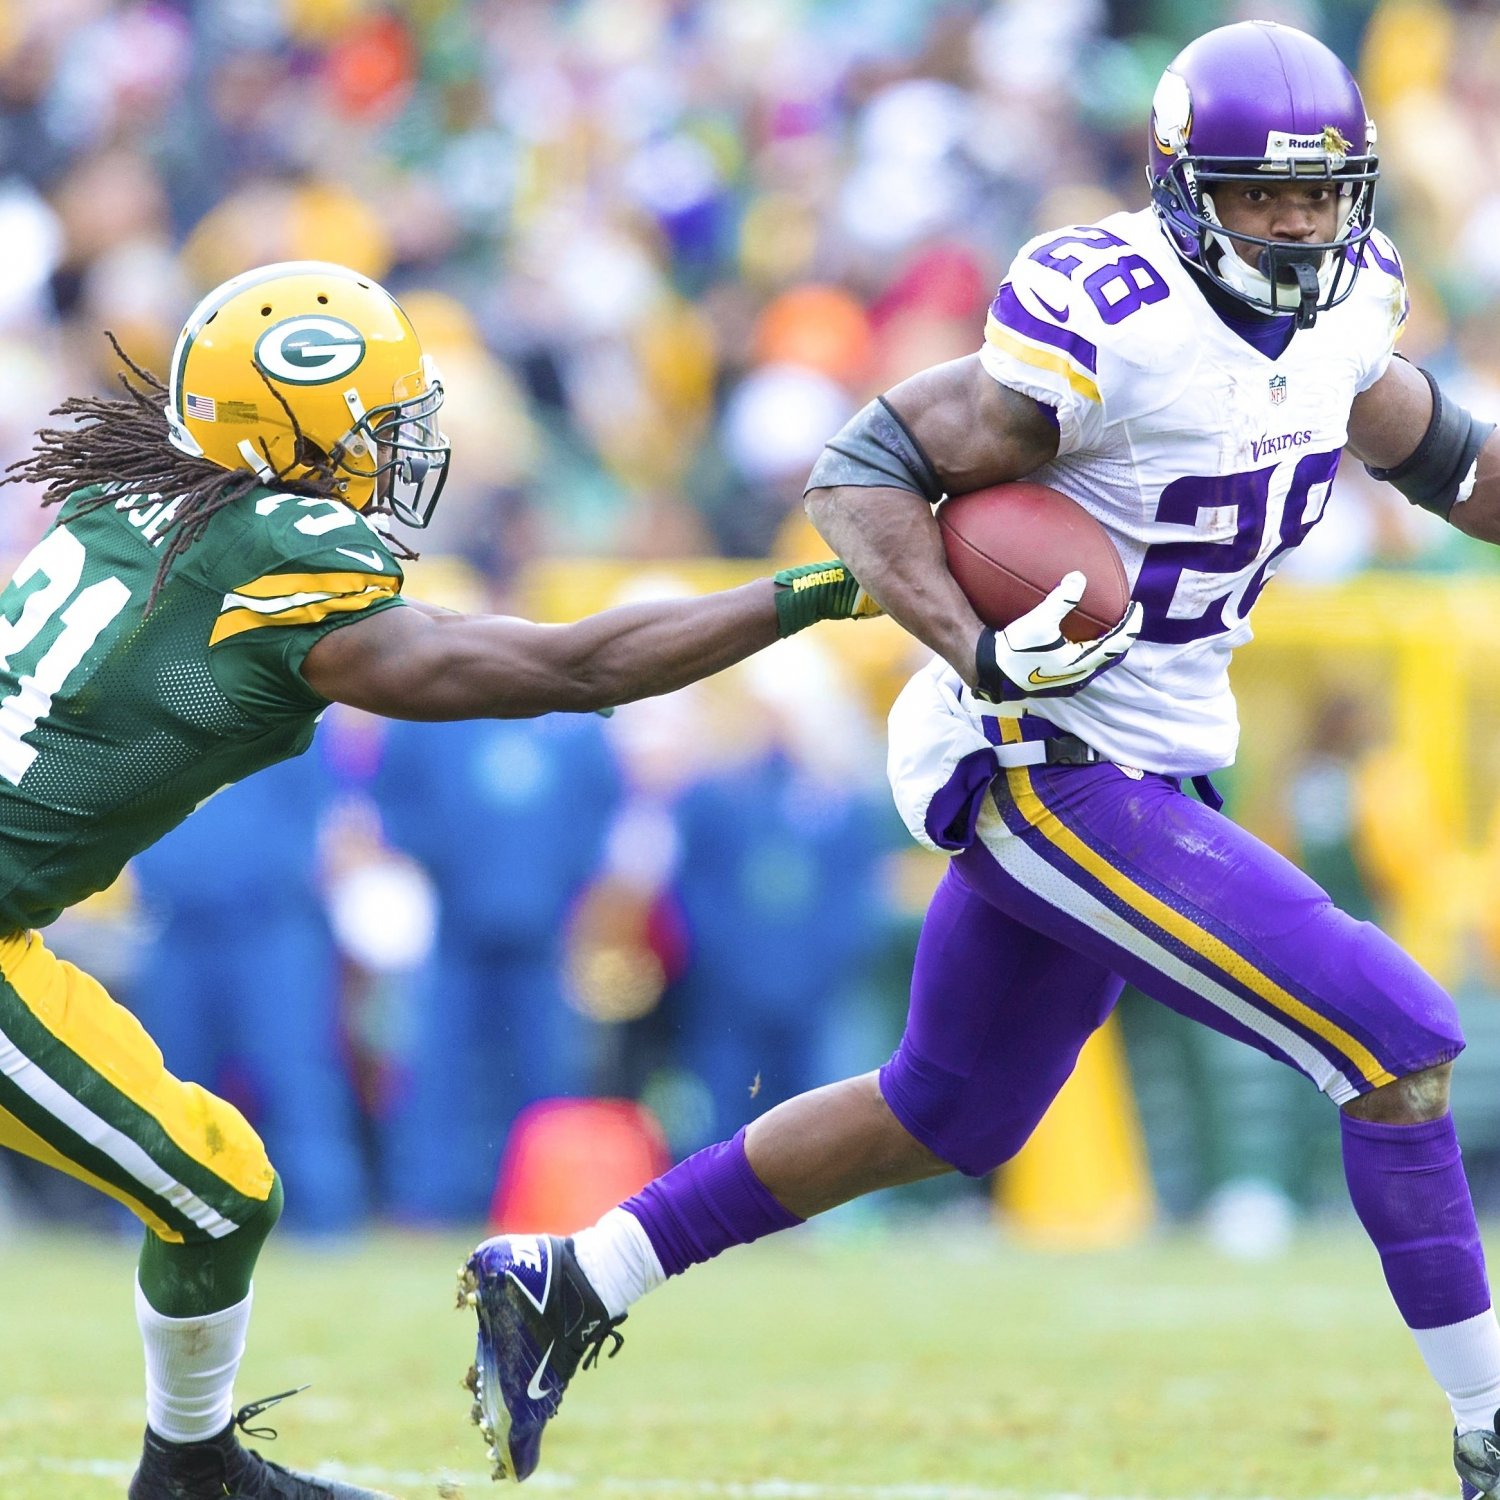 Vikings vs. Packers Live Score, Highlights and Analysis Bleacher Report